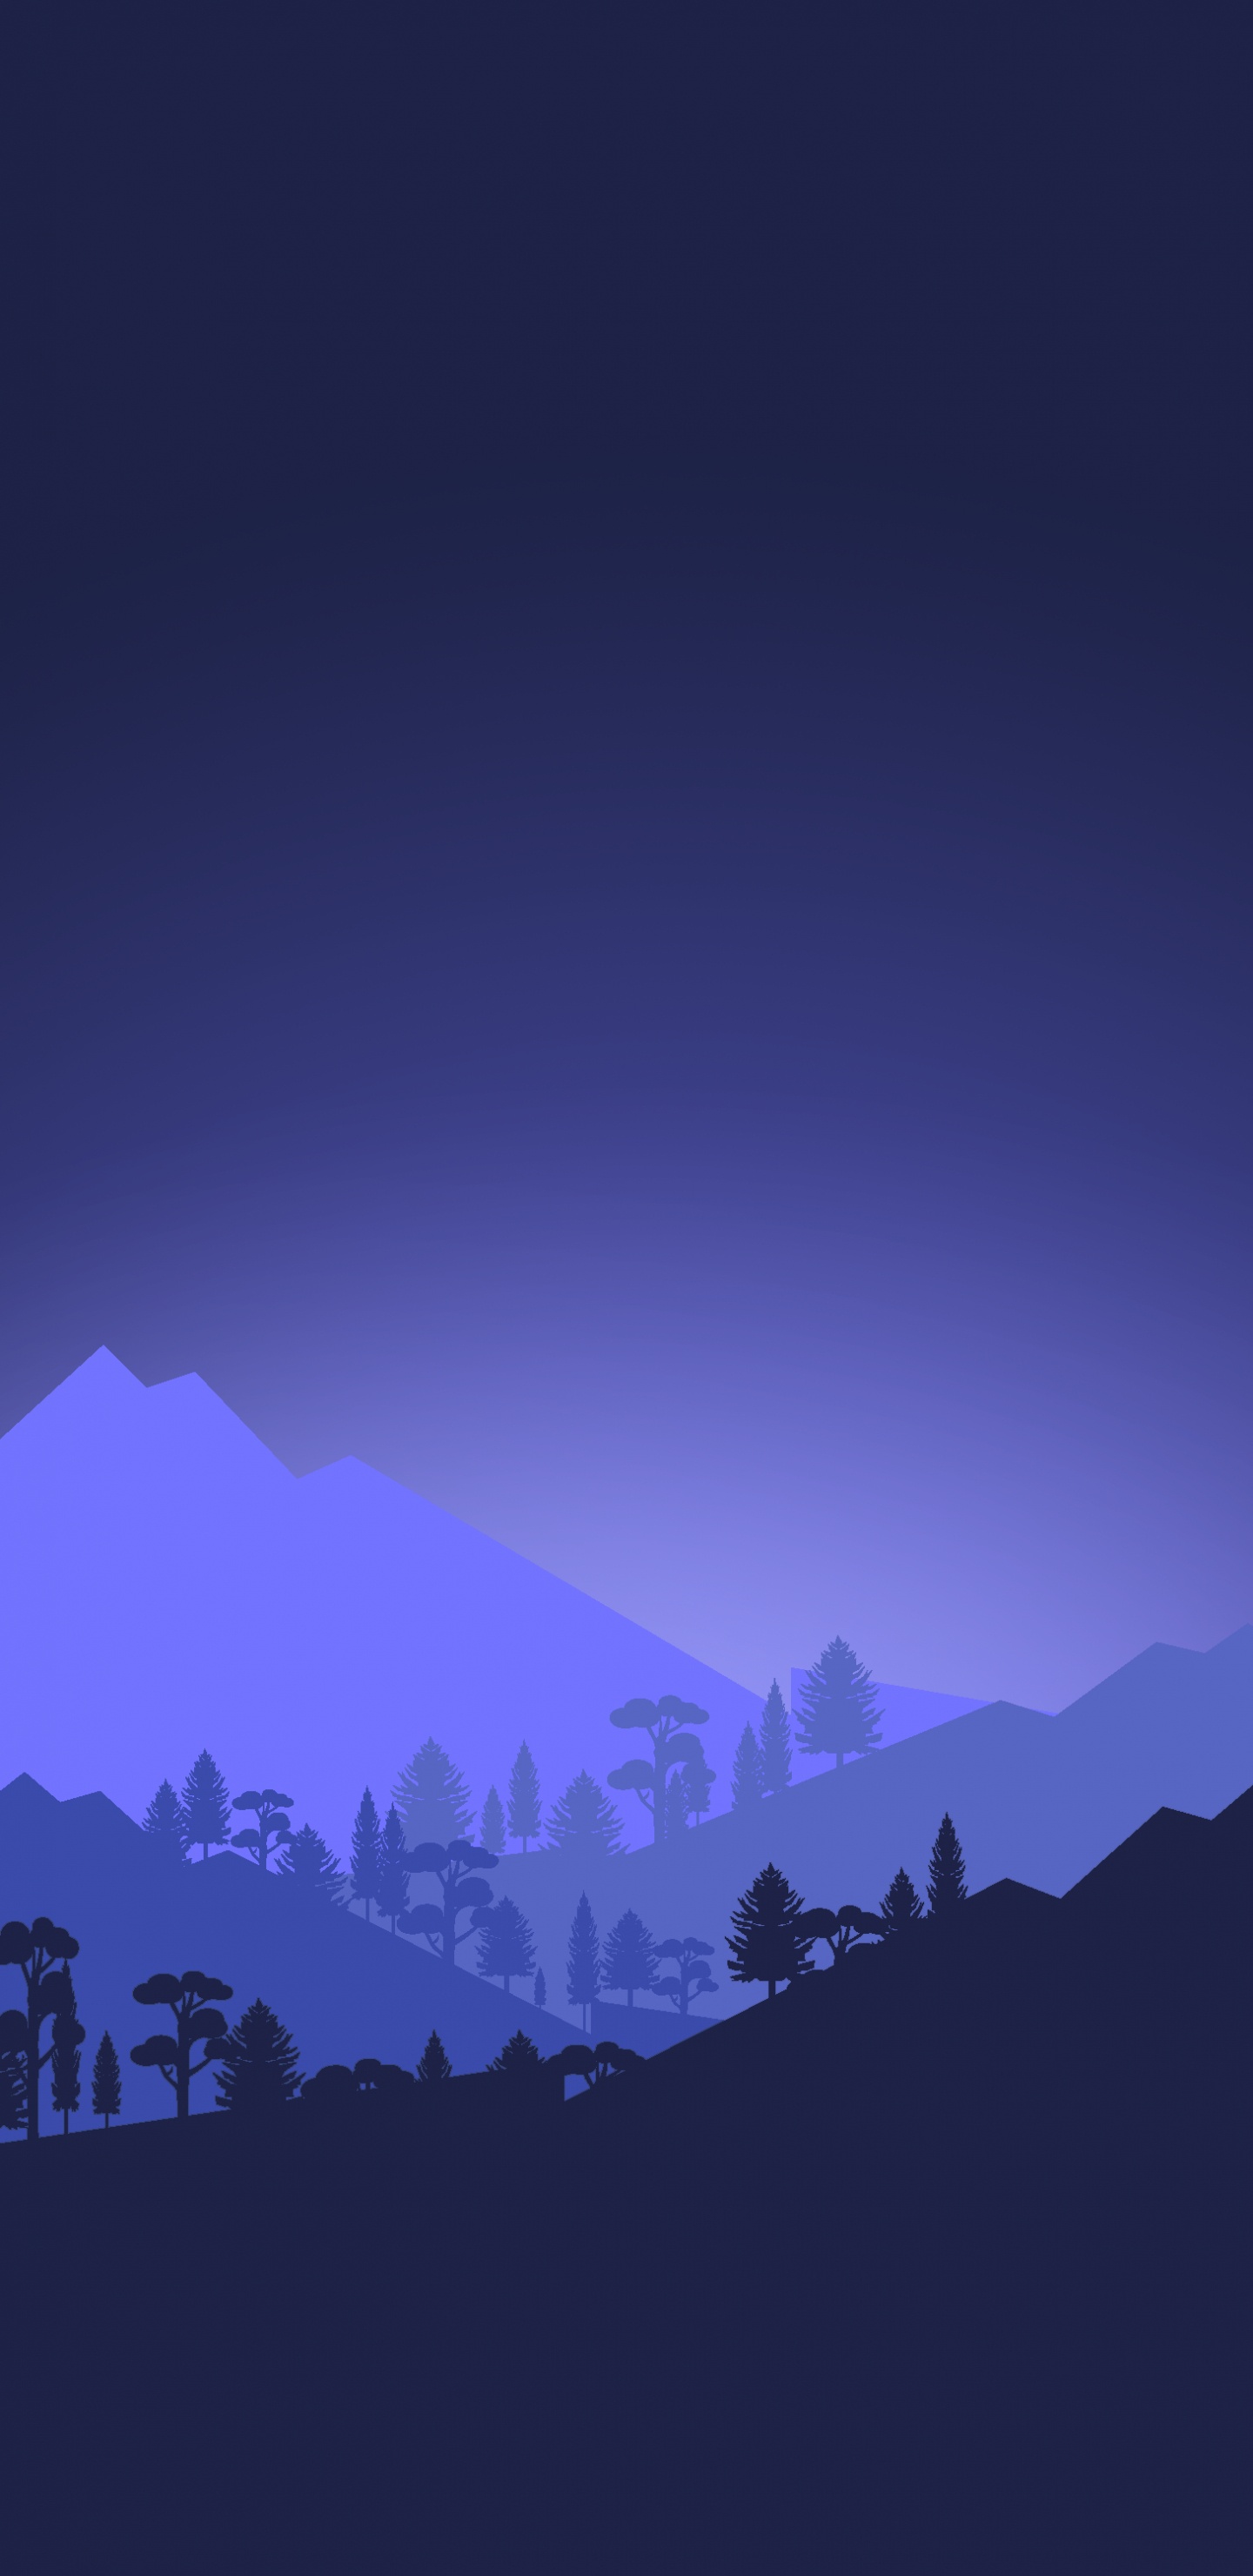 Ios, Smartphone, Apples, Mountain, Atmosphere. Wallpaper in 1440x2960 Resolution